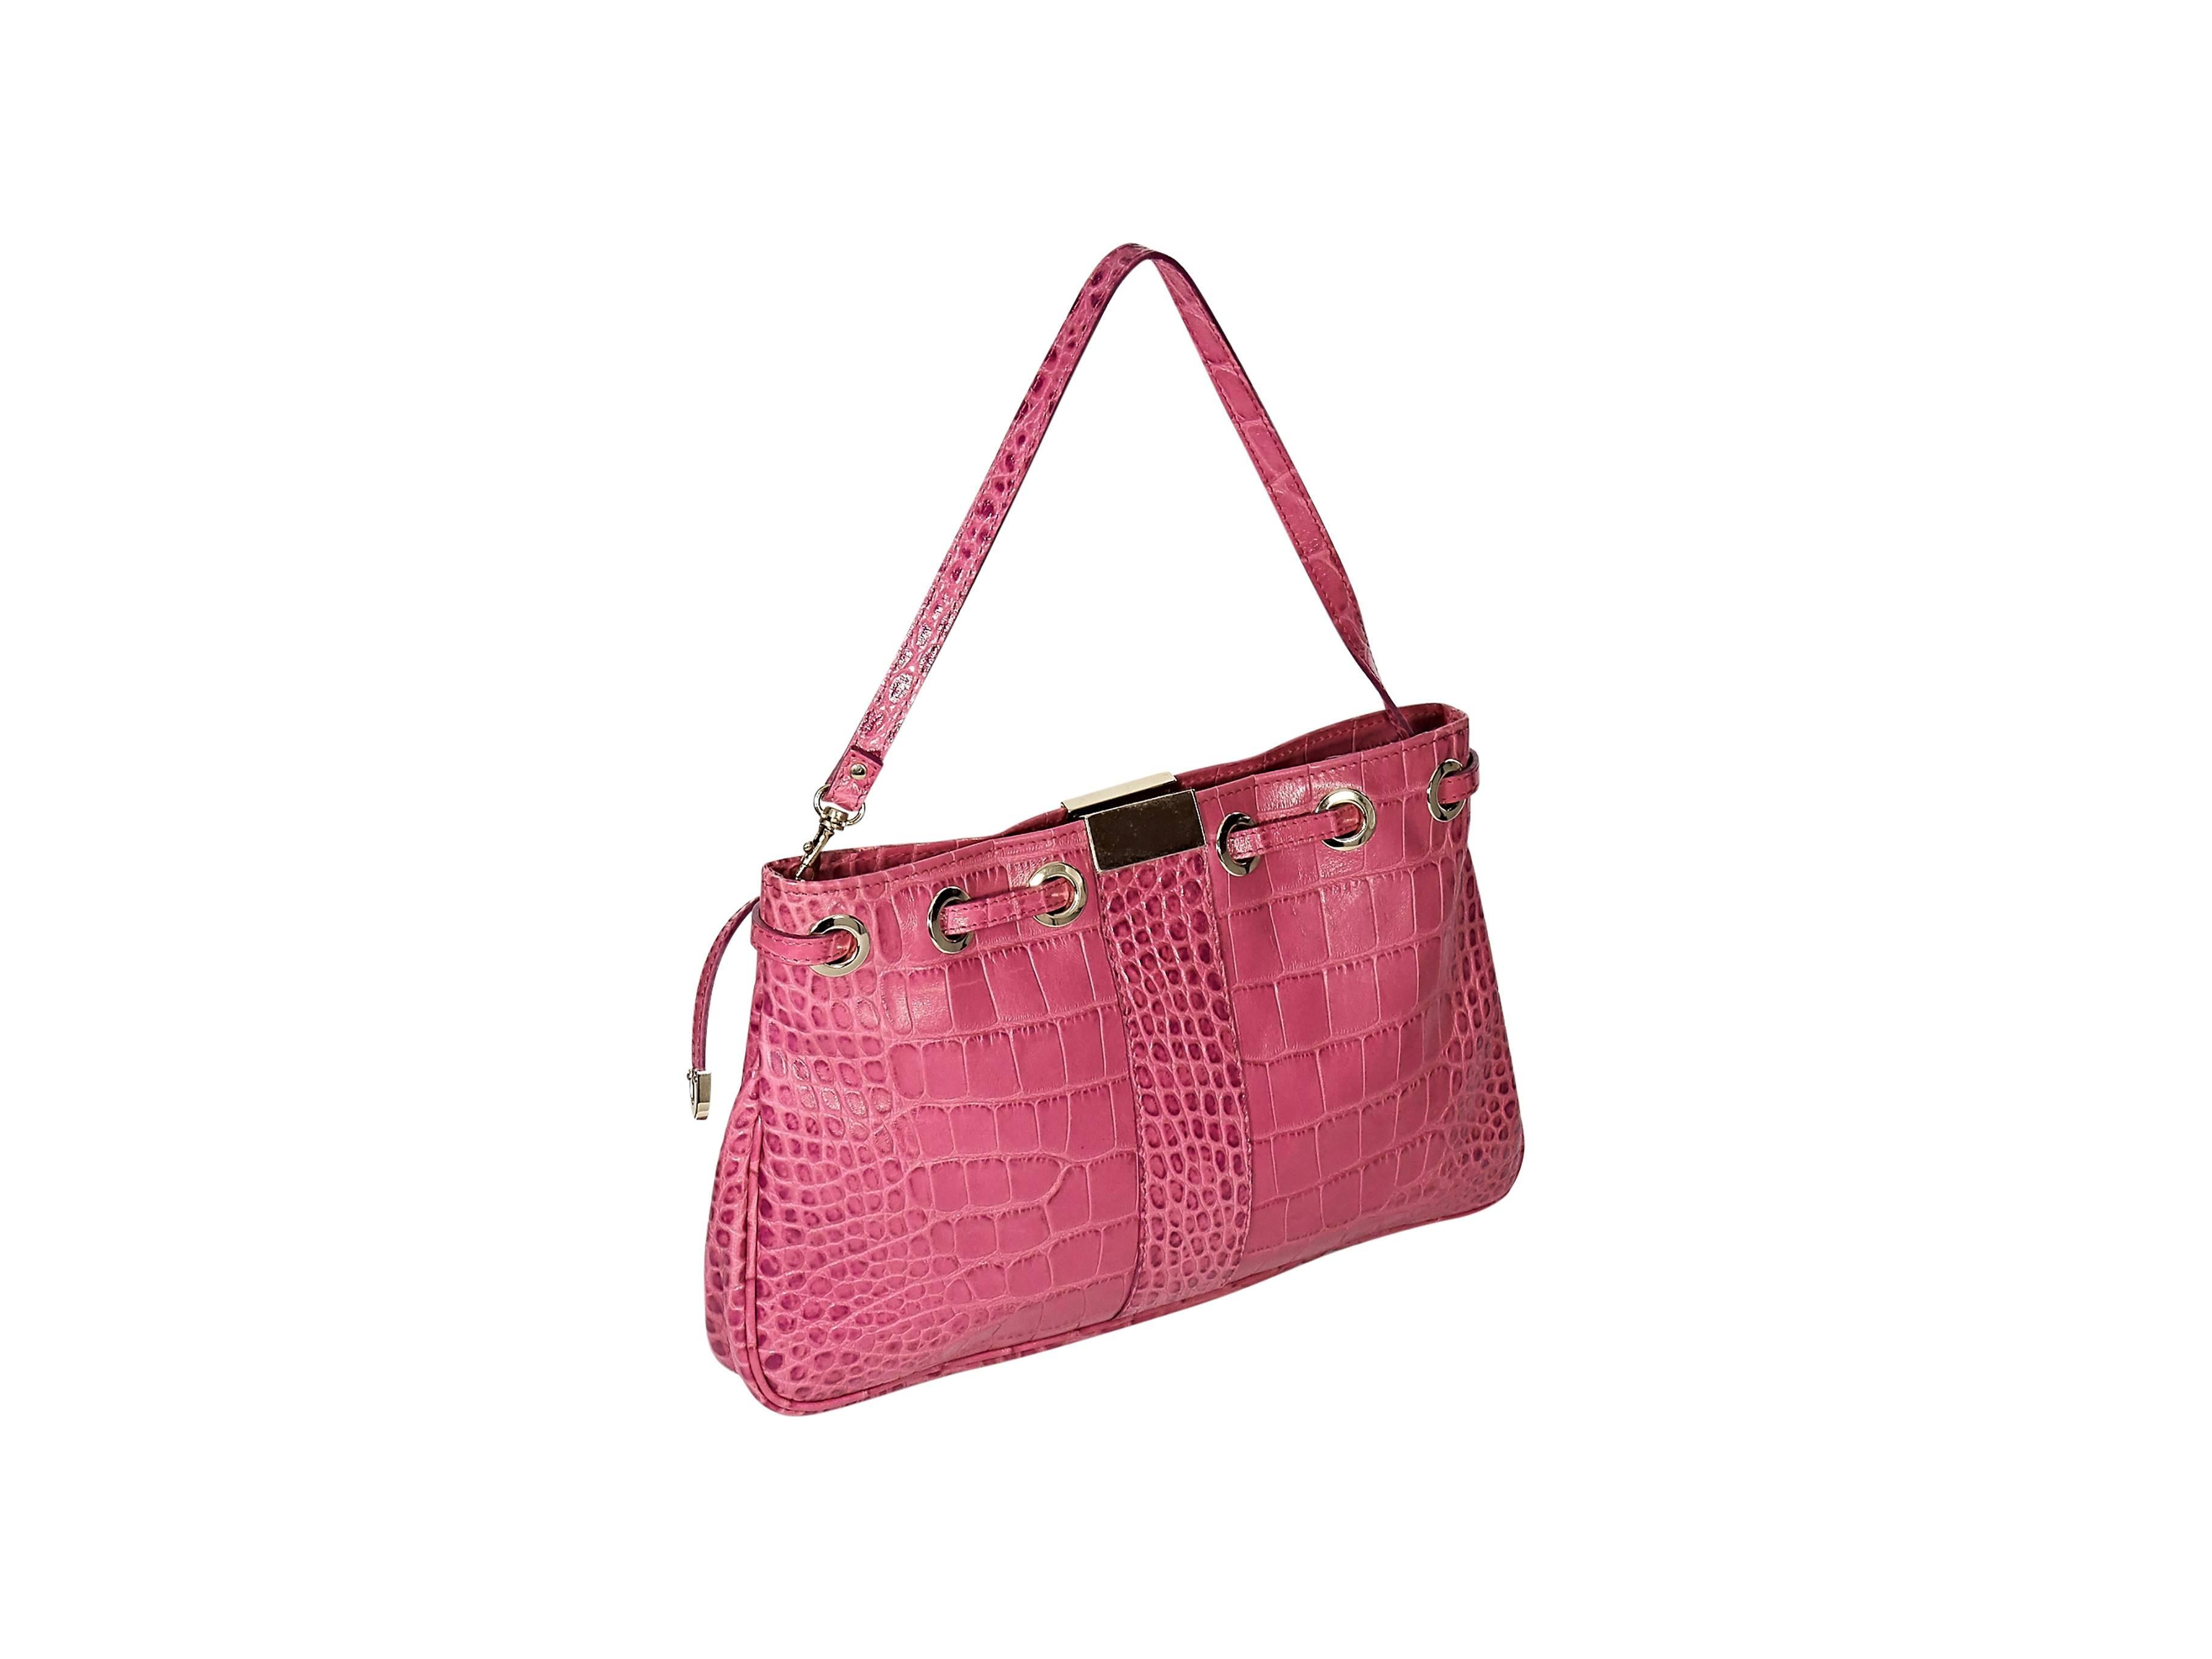 Product details: Pink snake-embossed leather shoulder bag by Jimmy Choo. Detachable single shoulder strap. Top zip closure. Lined interior with inner pockets. Goldtone hardware. Authenticity card included. 12